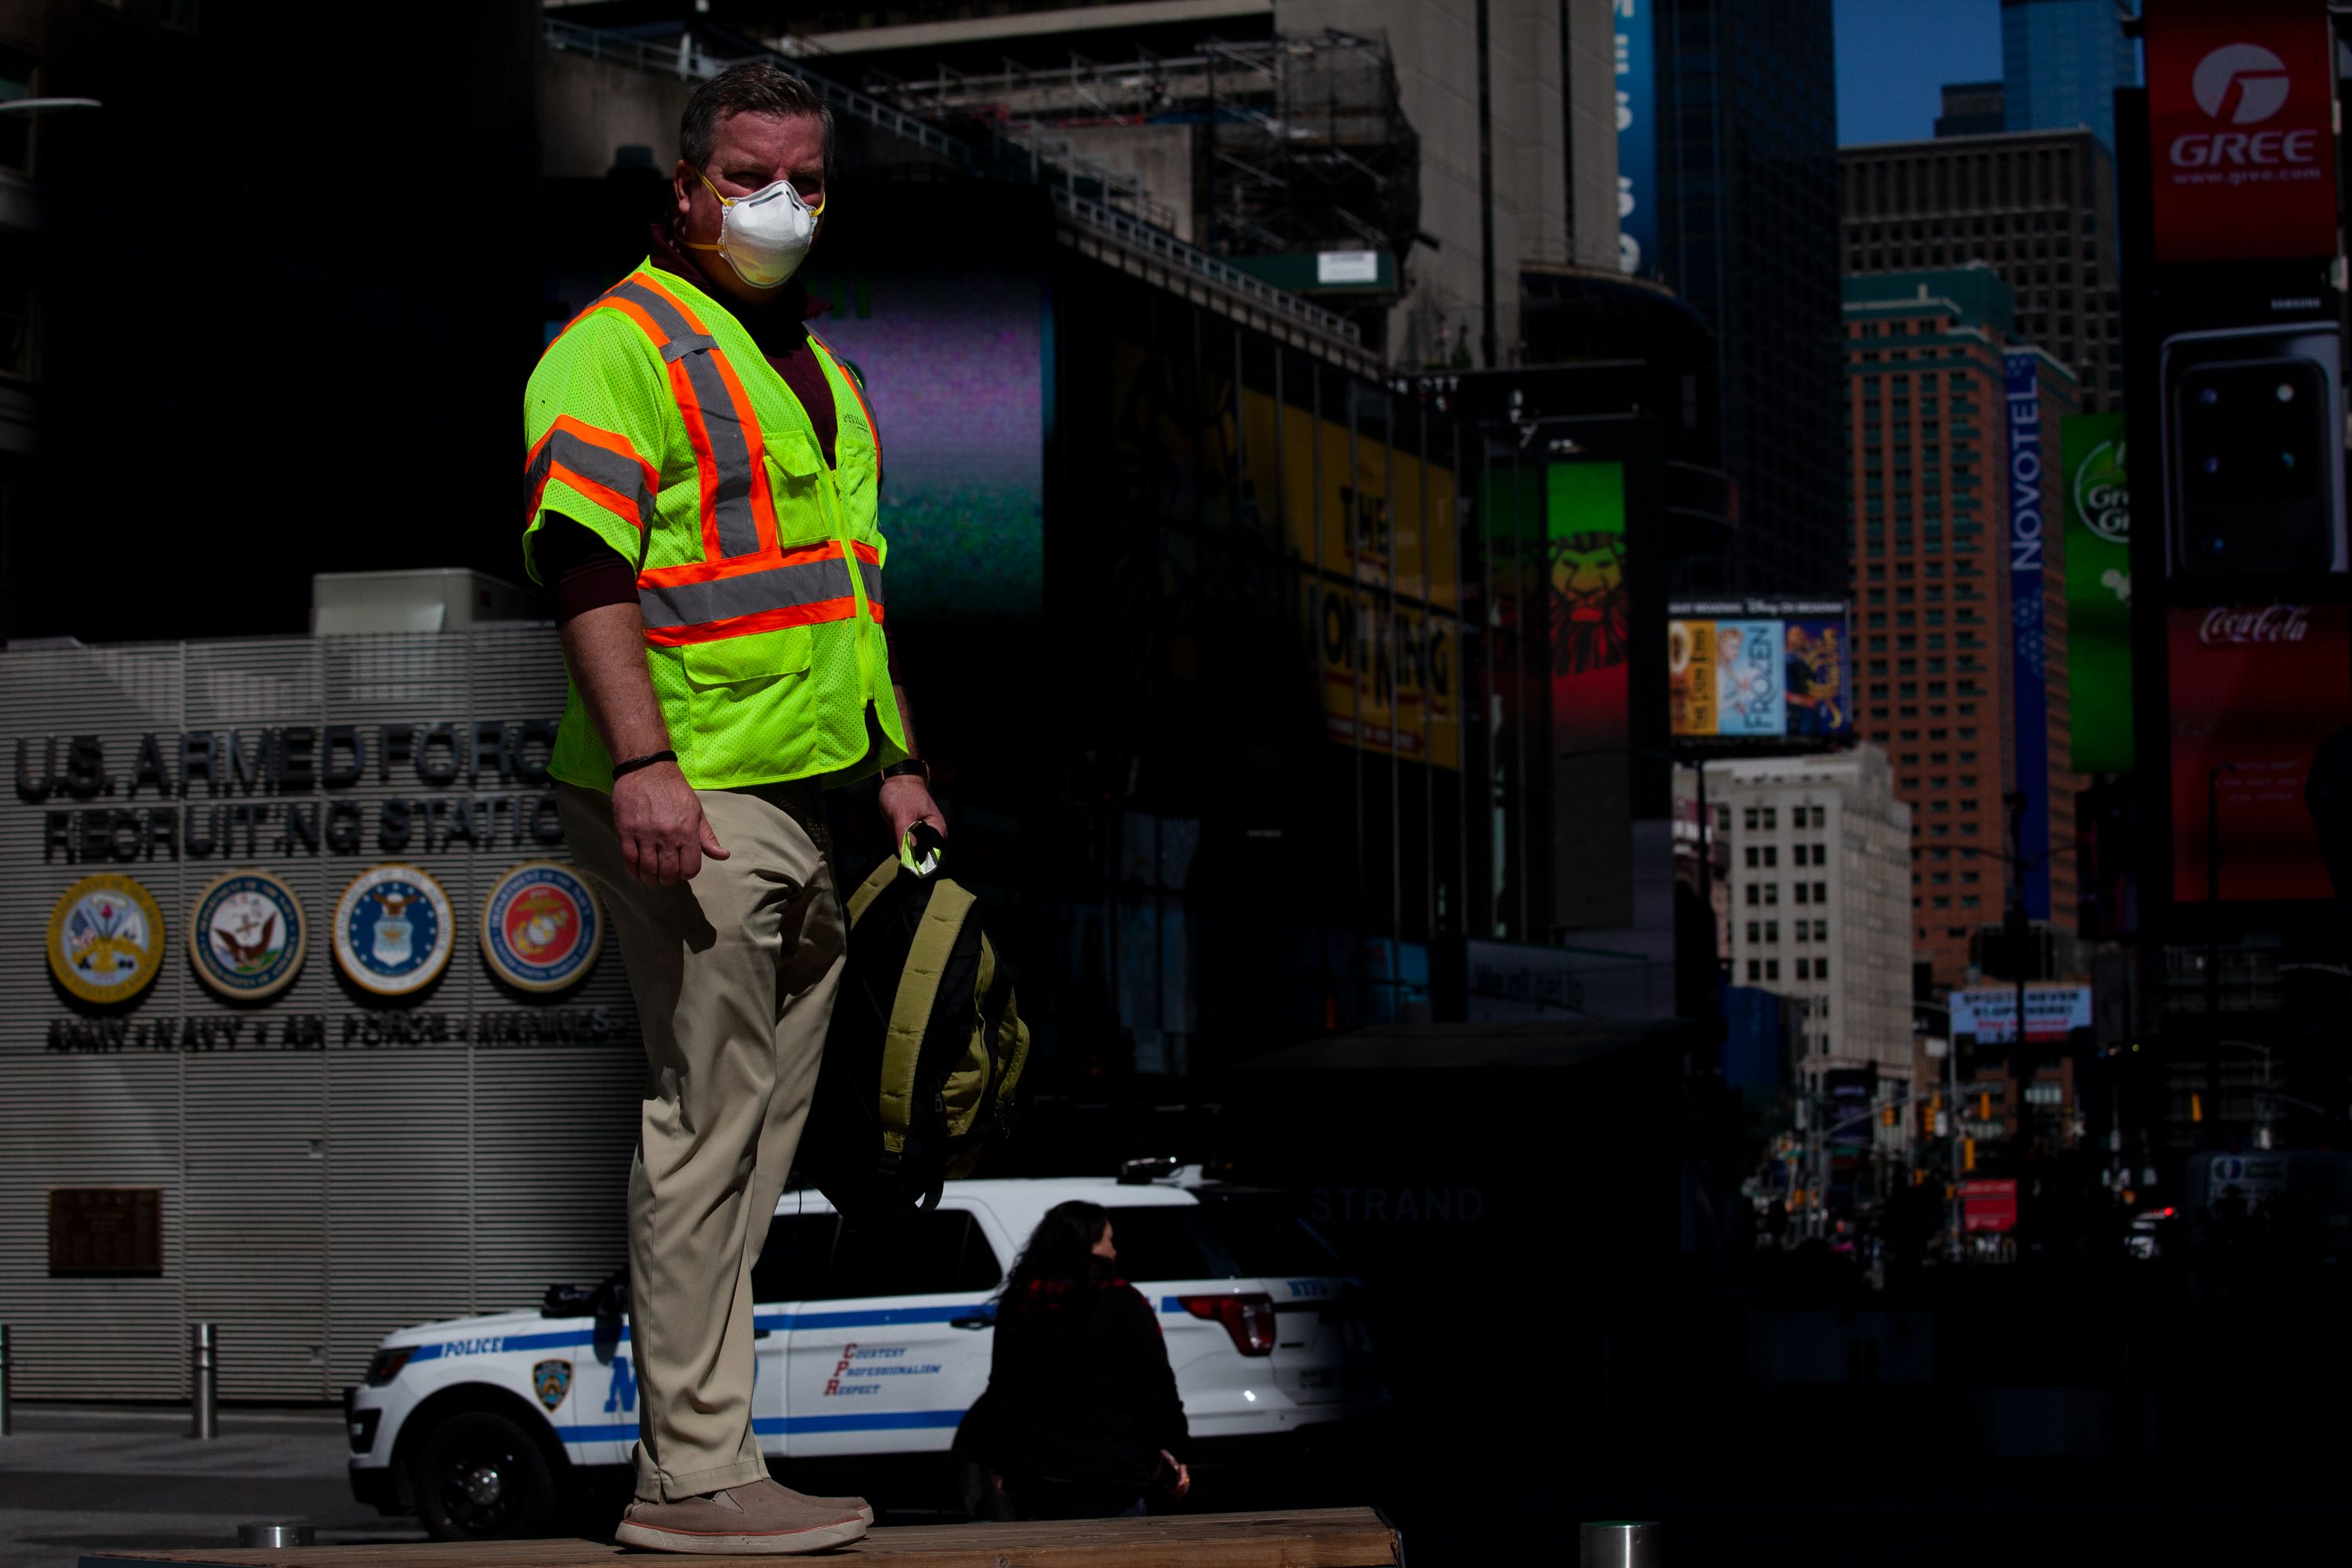 Construction waste recycling worker Sean Ragiel takes a break in Times Square after working at a job site.